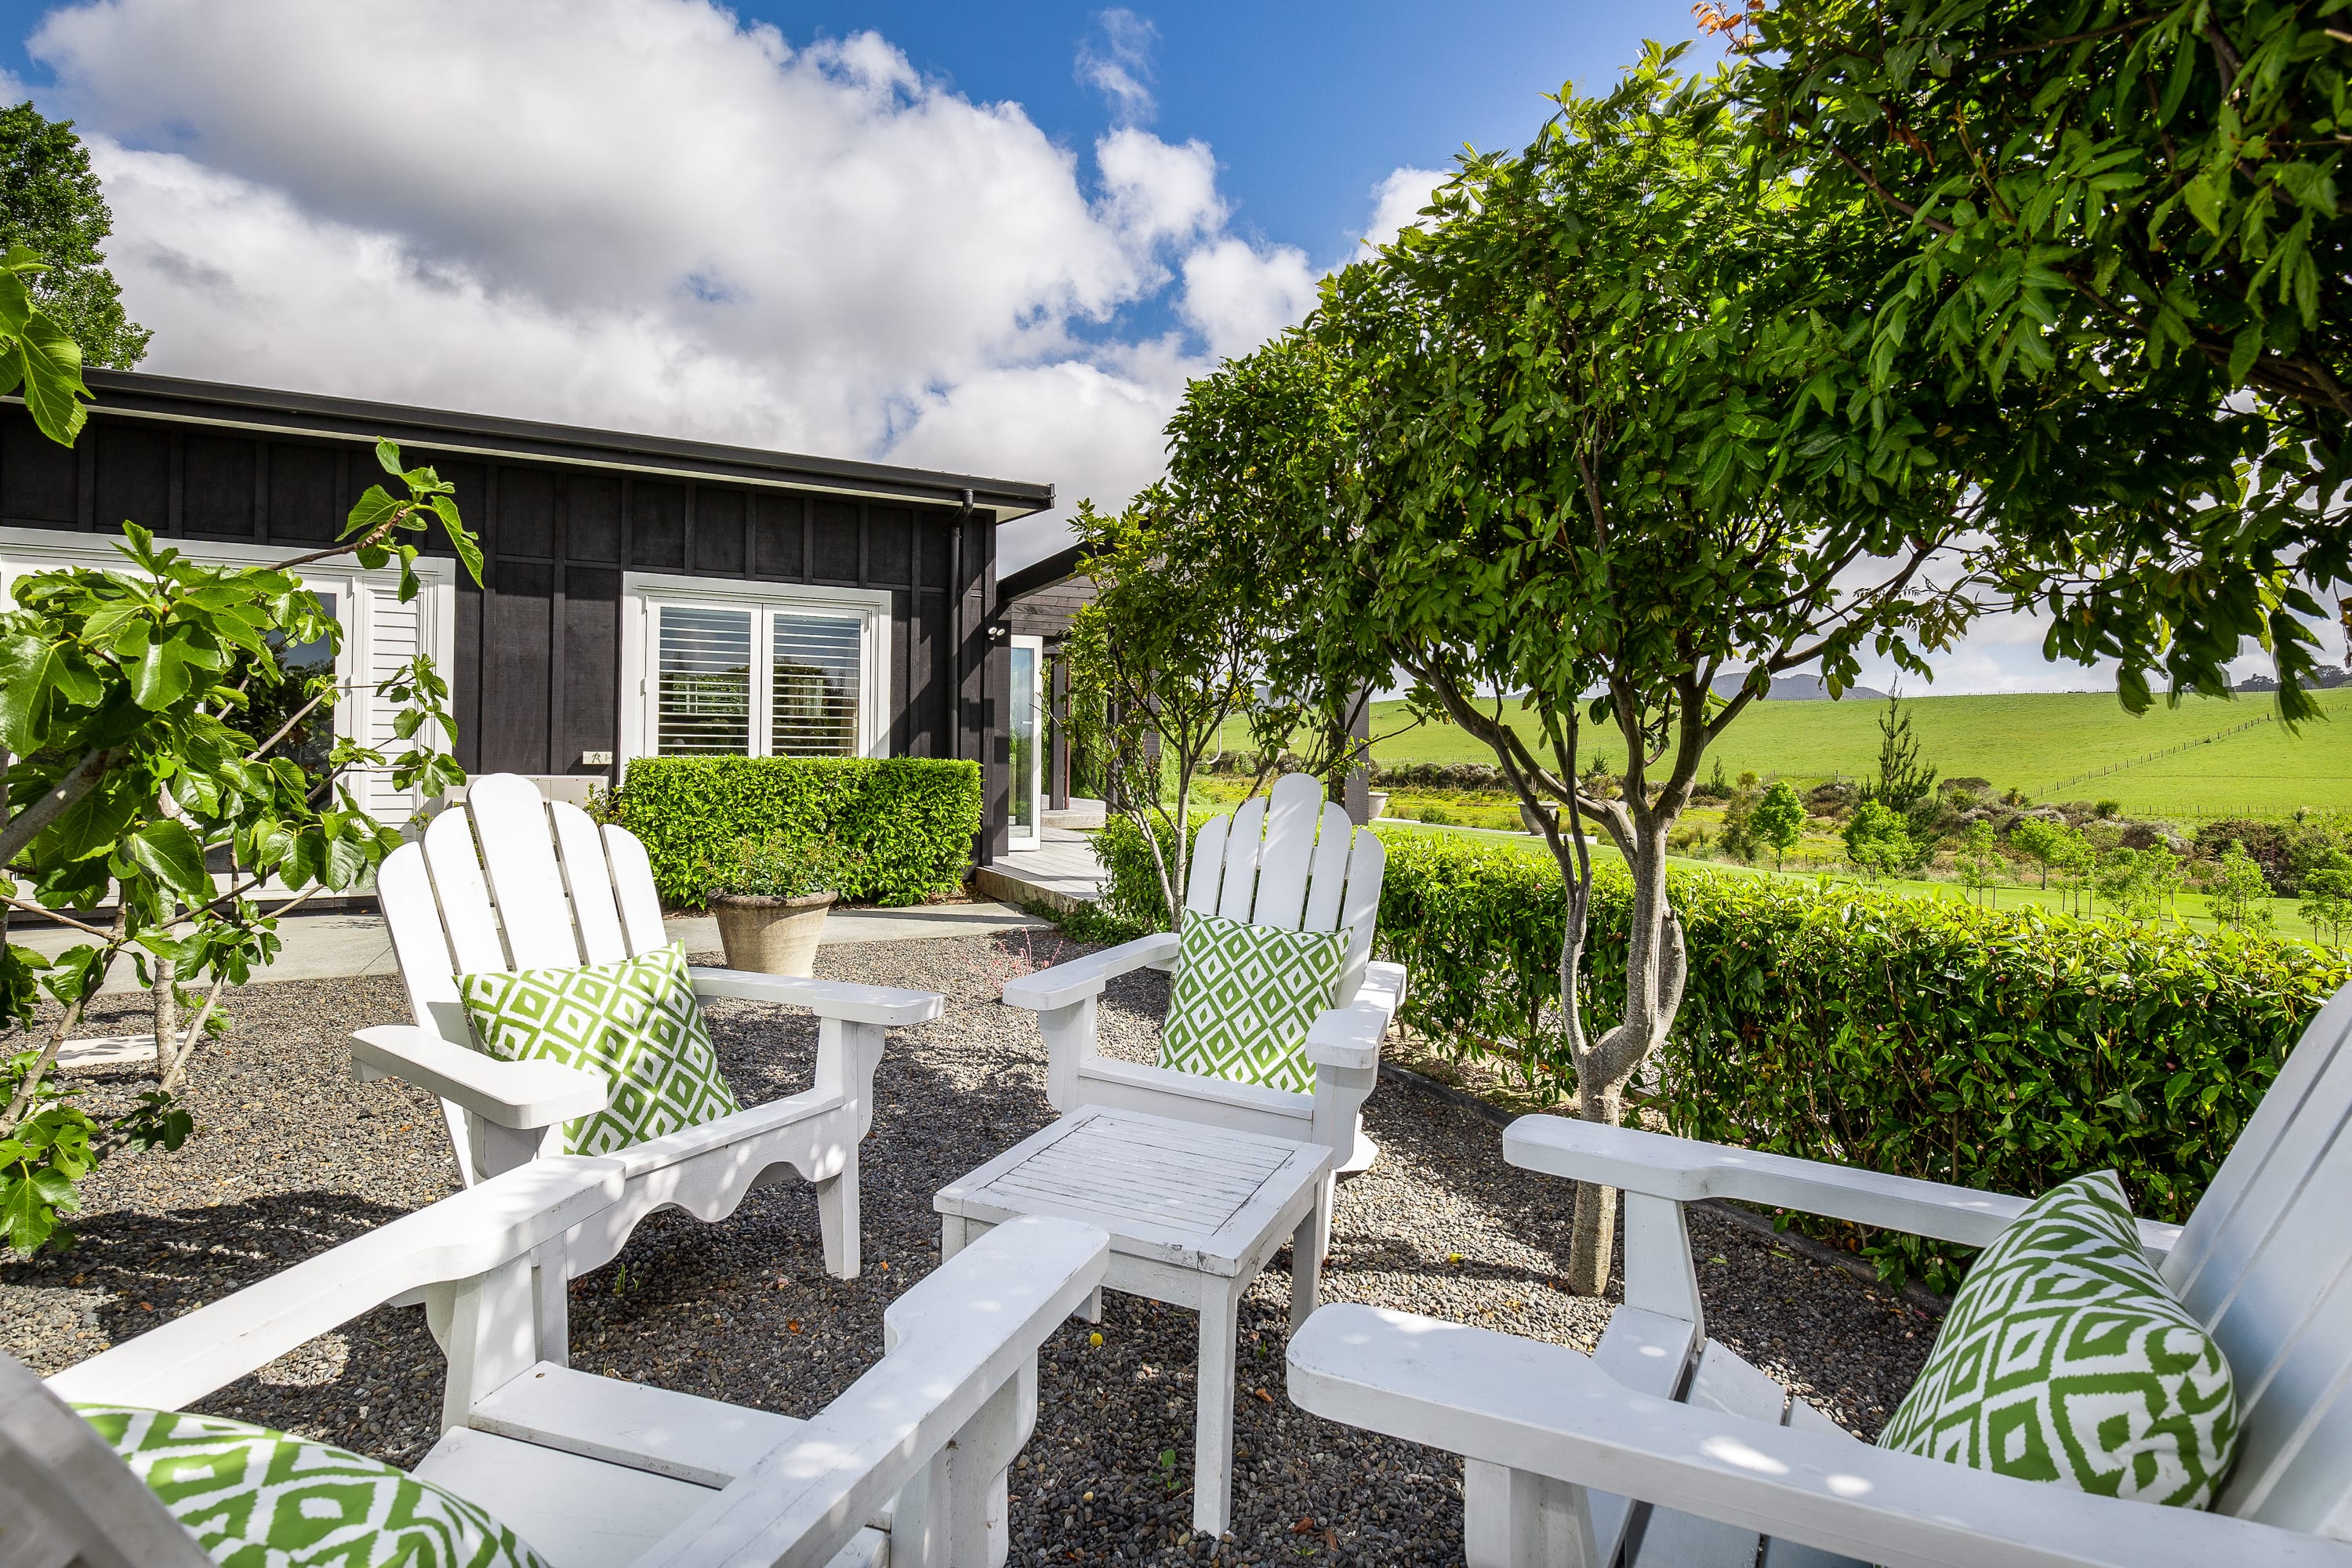 Outdoor seating, cape cod chairs, garden design